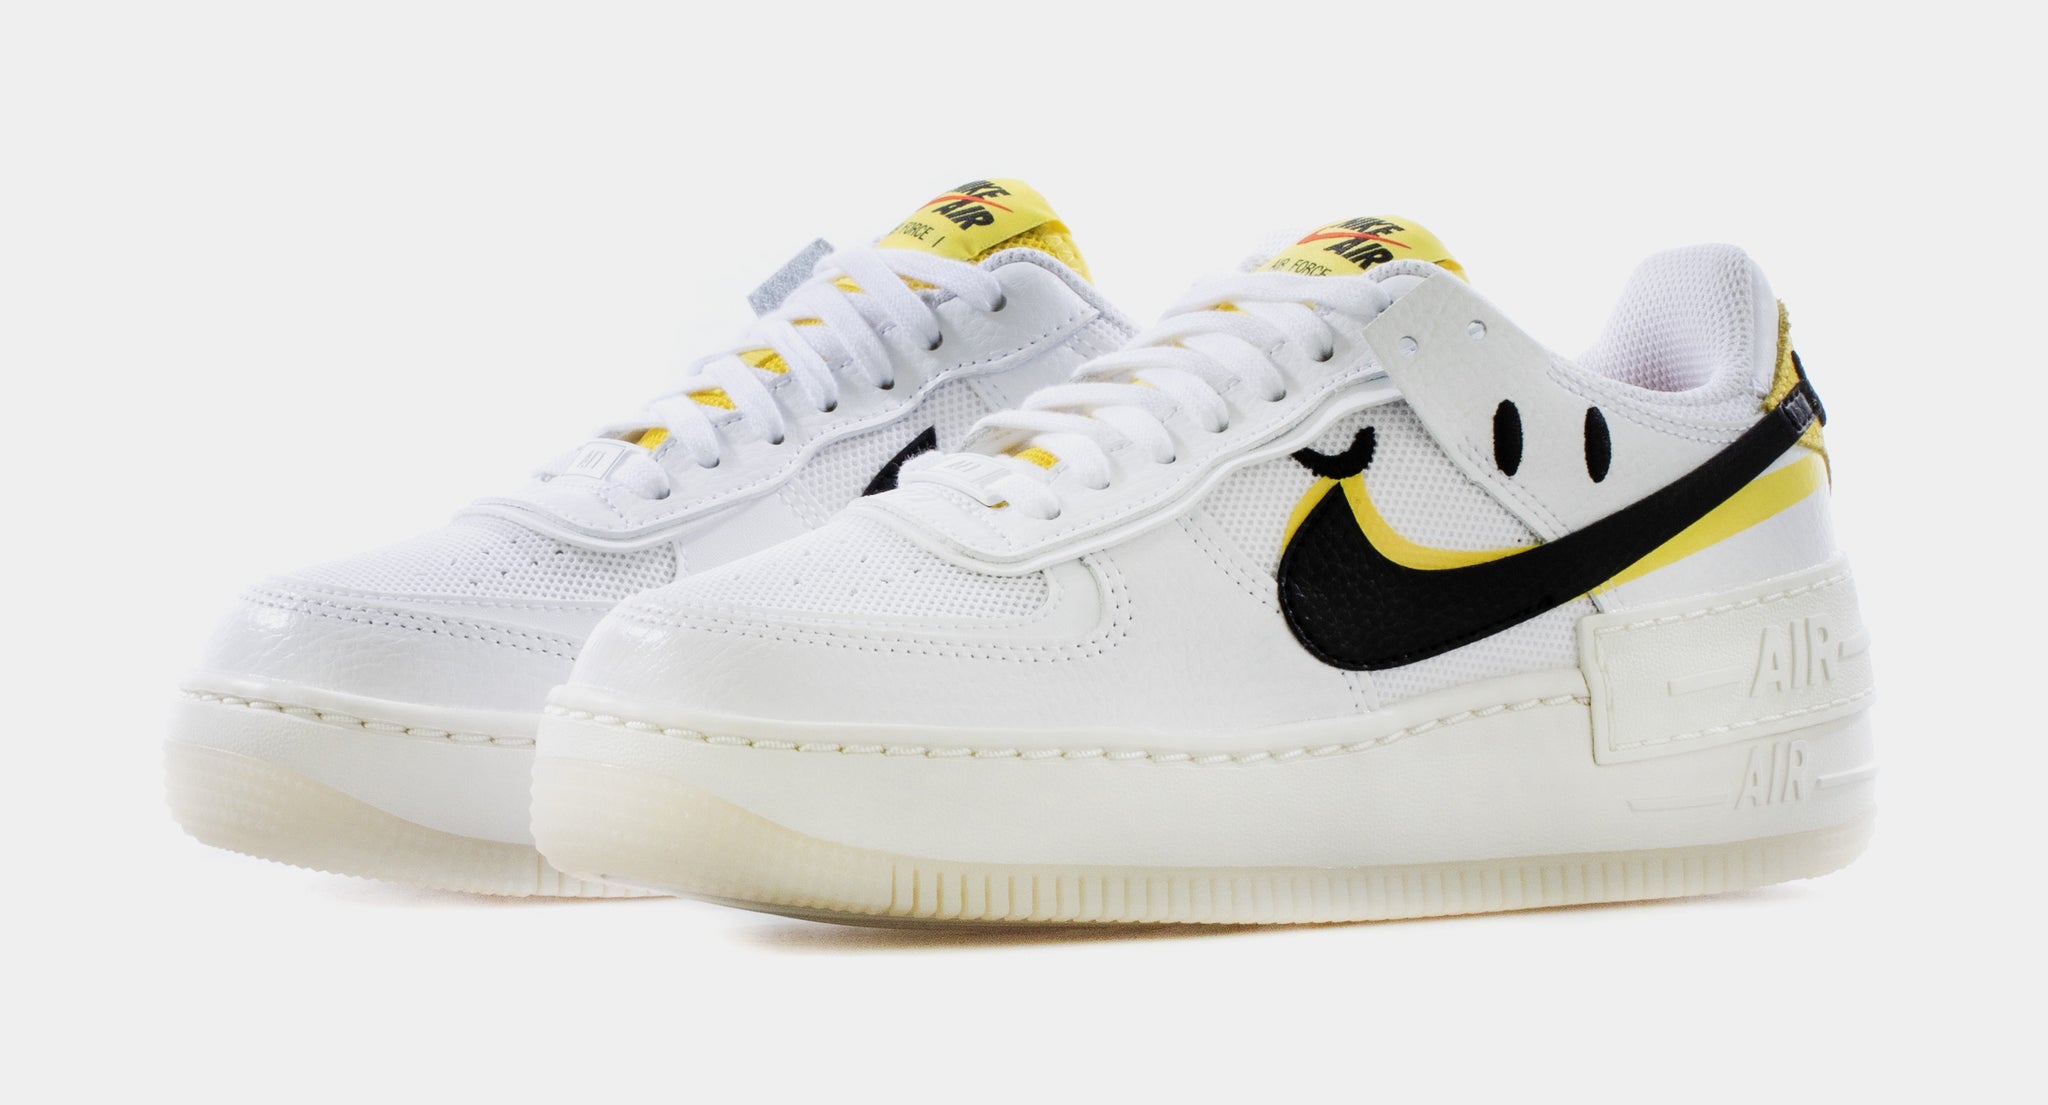 Nike Air Force 1 Shadow Smile Women's Shoes, White/Yellow, Size: 8.5